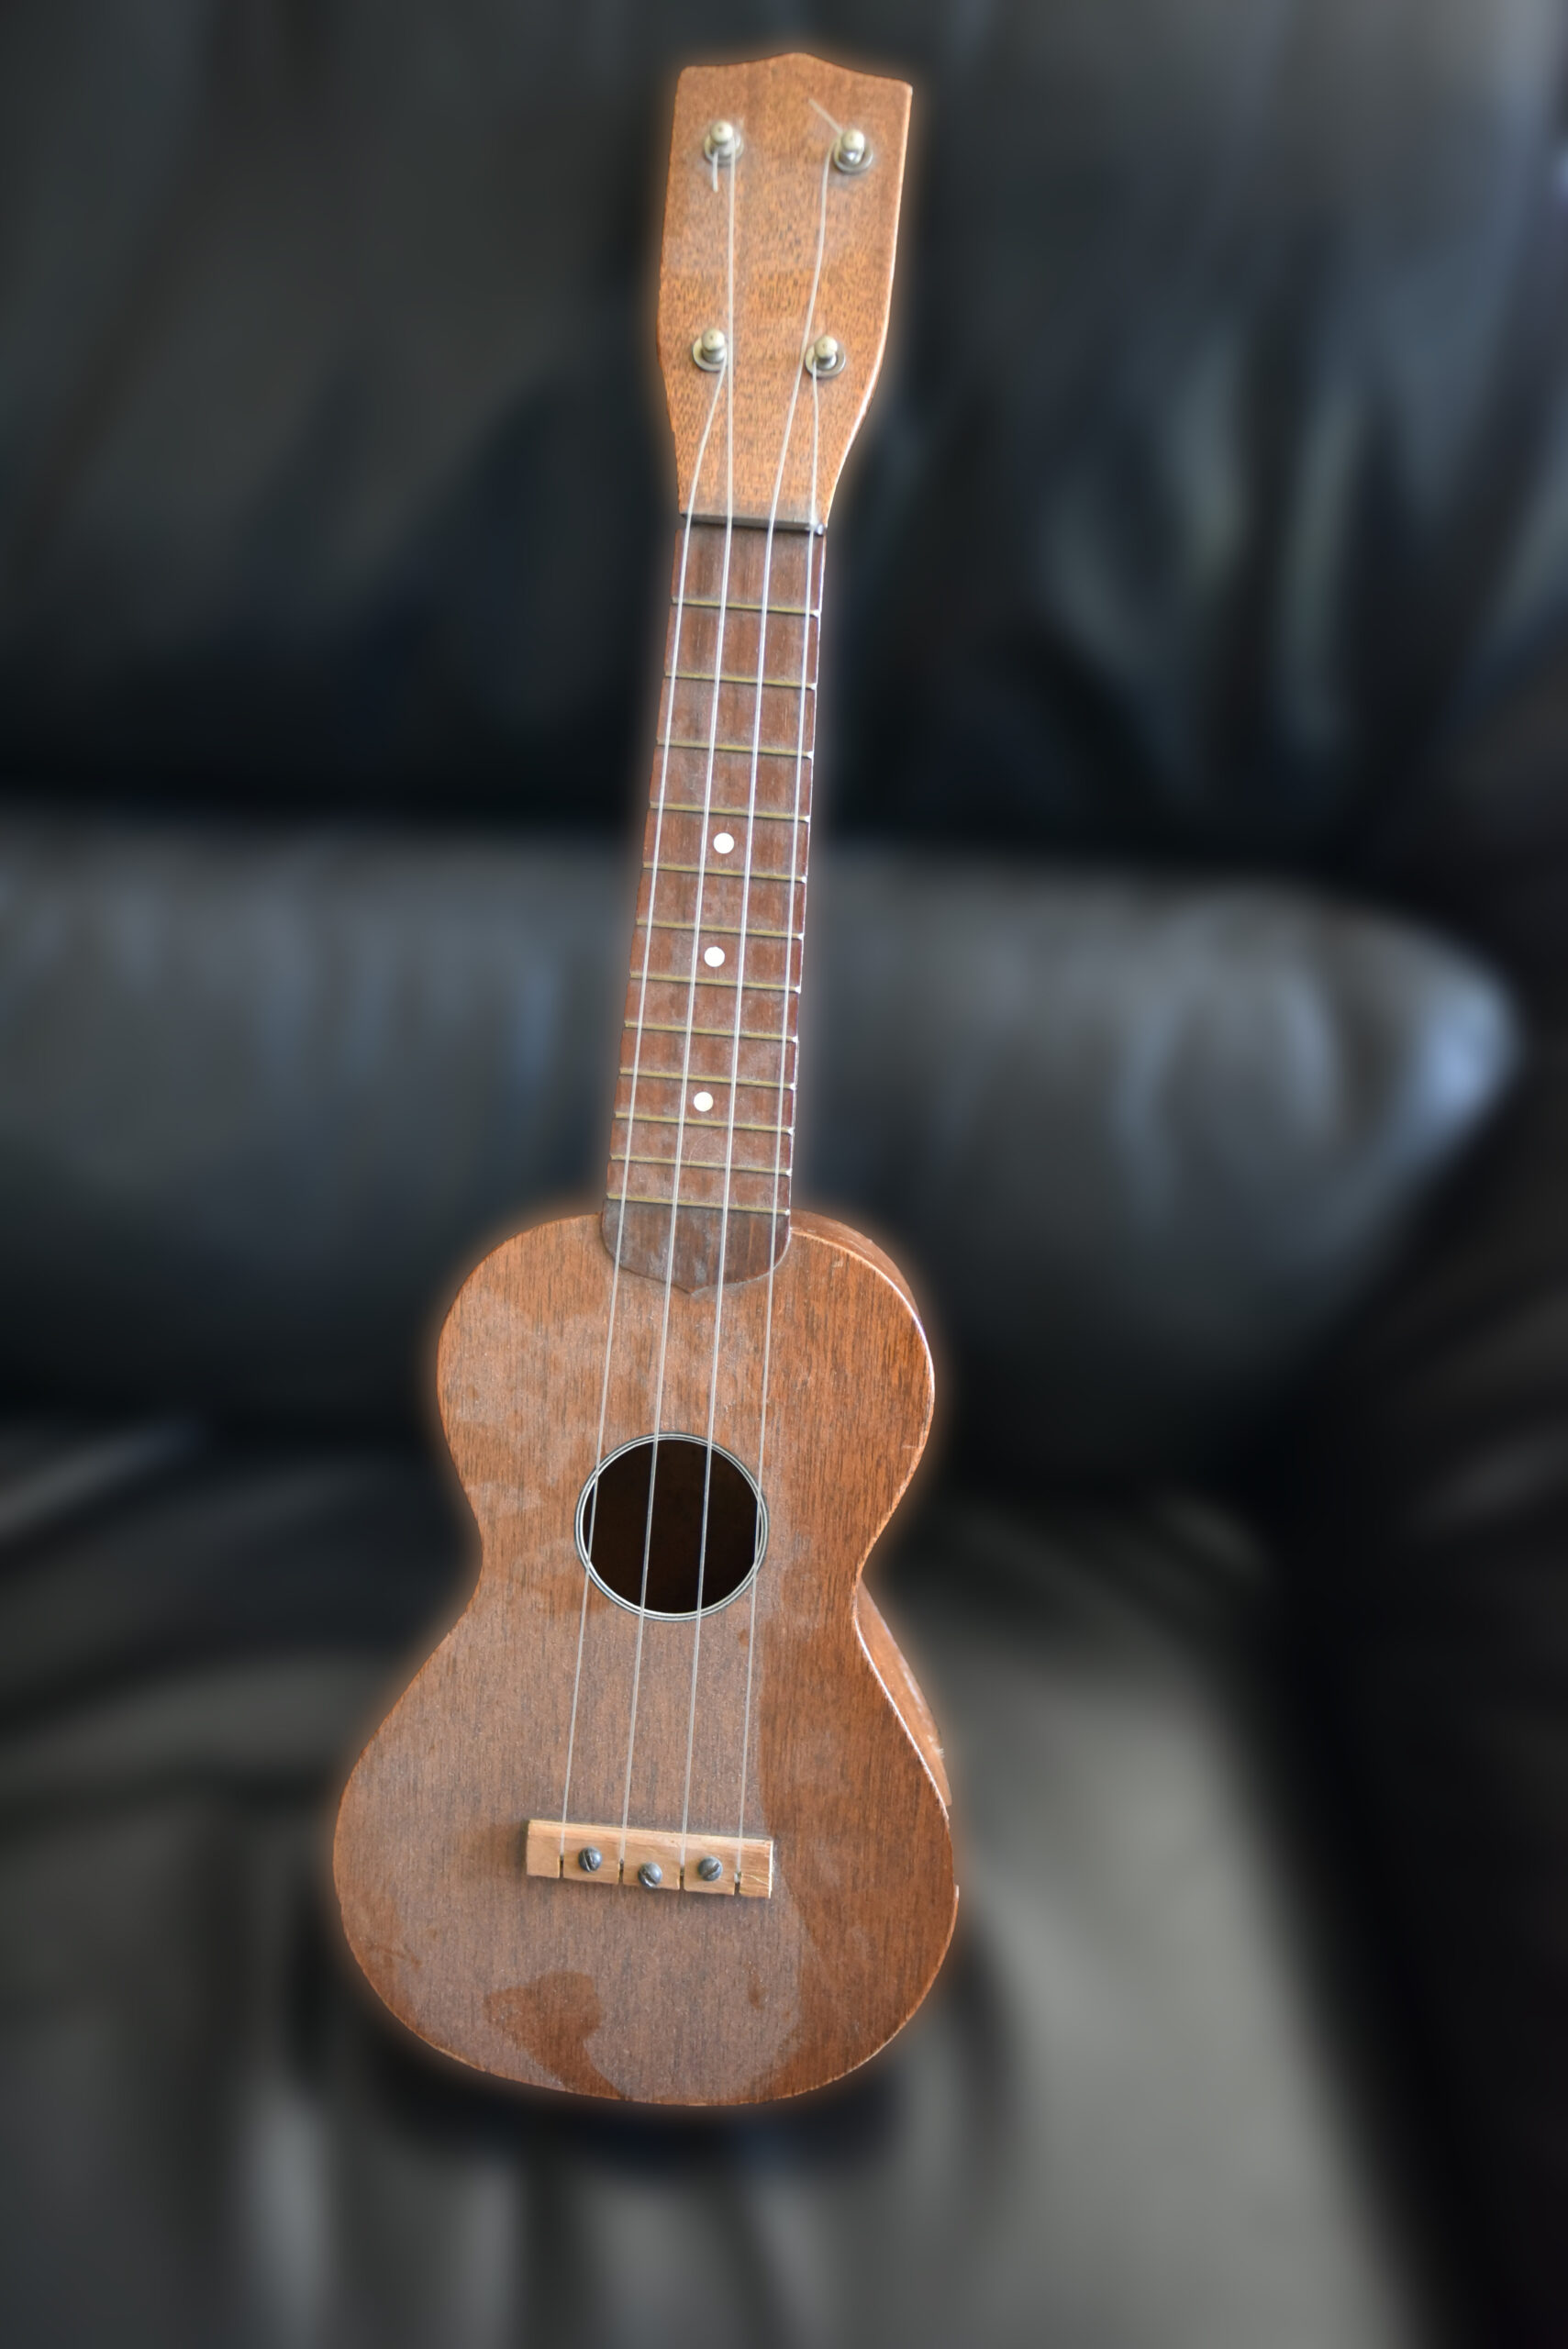 A small dusty ukulele sitting on a couch